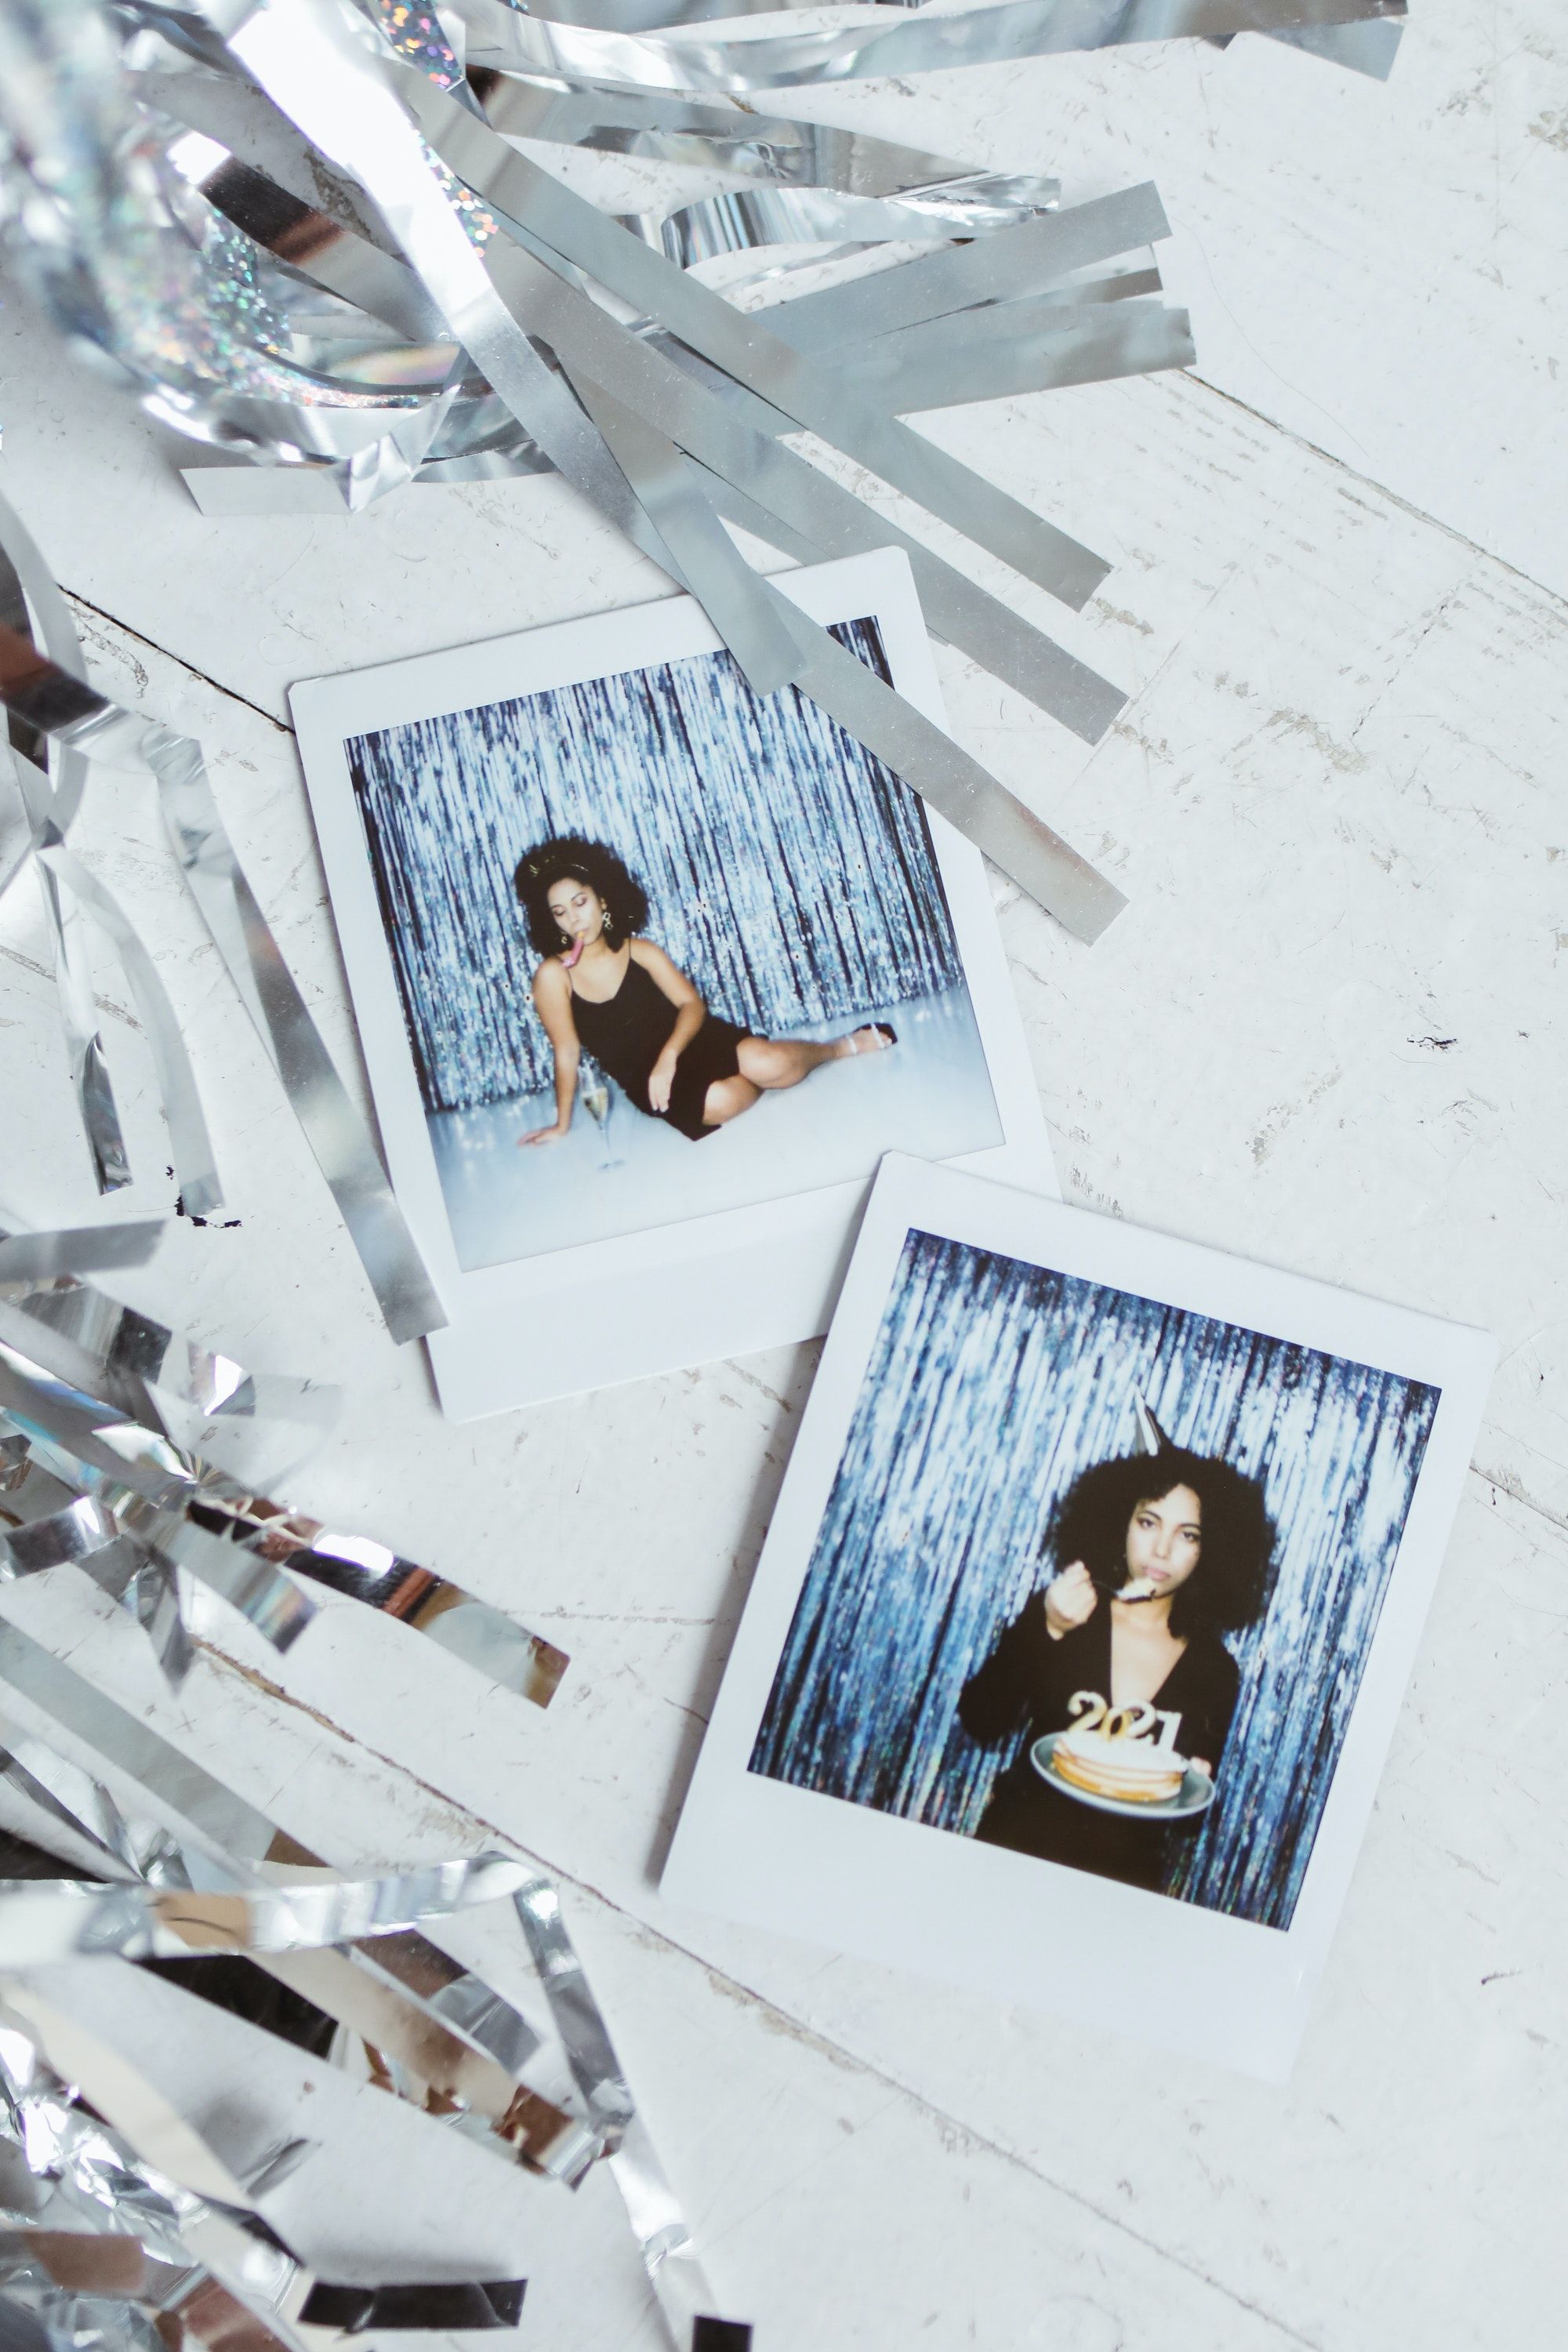 Polaroid photos of a woman in a black swimsuit and a black bodysuit on a white background with silver streamers - Polaroid